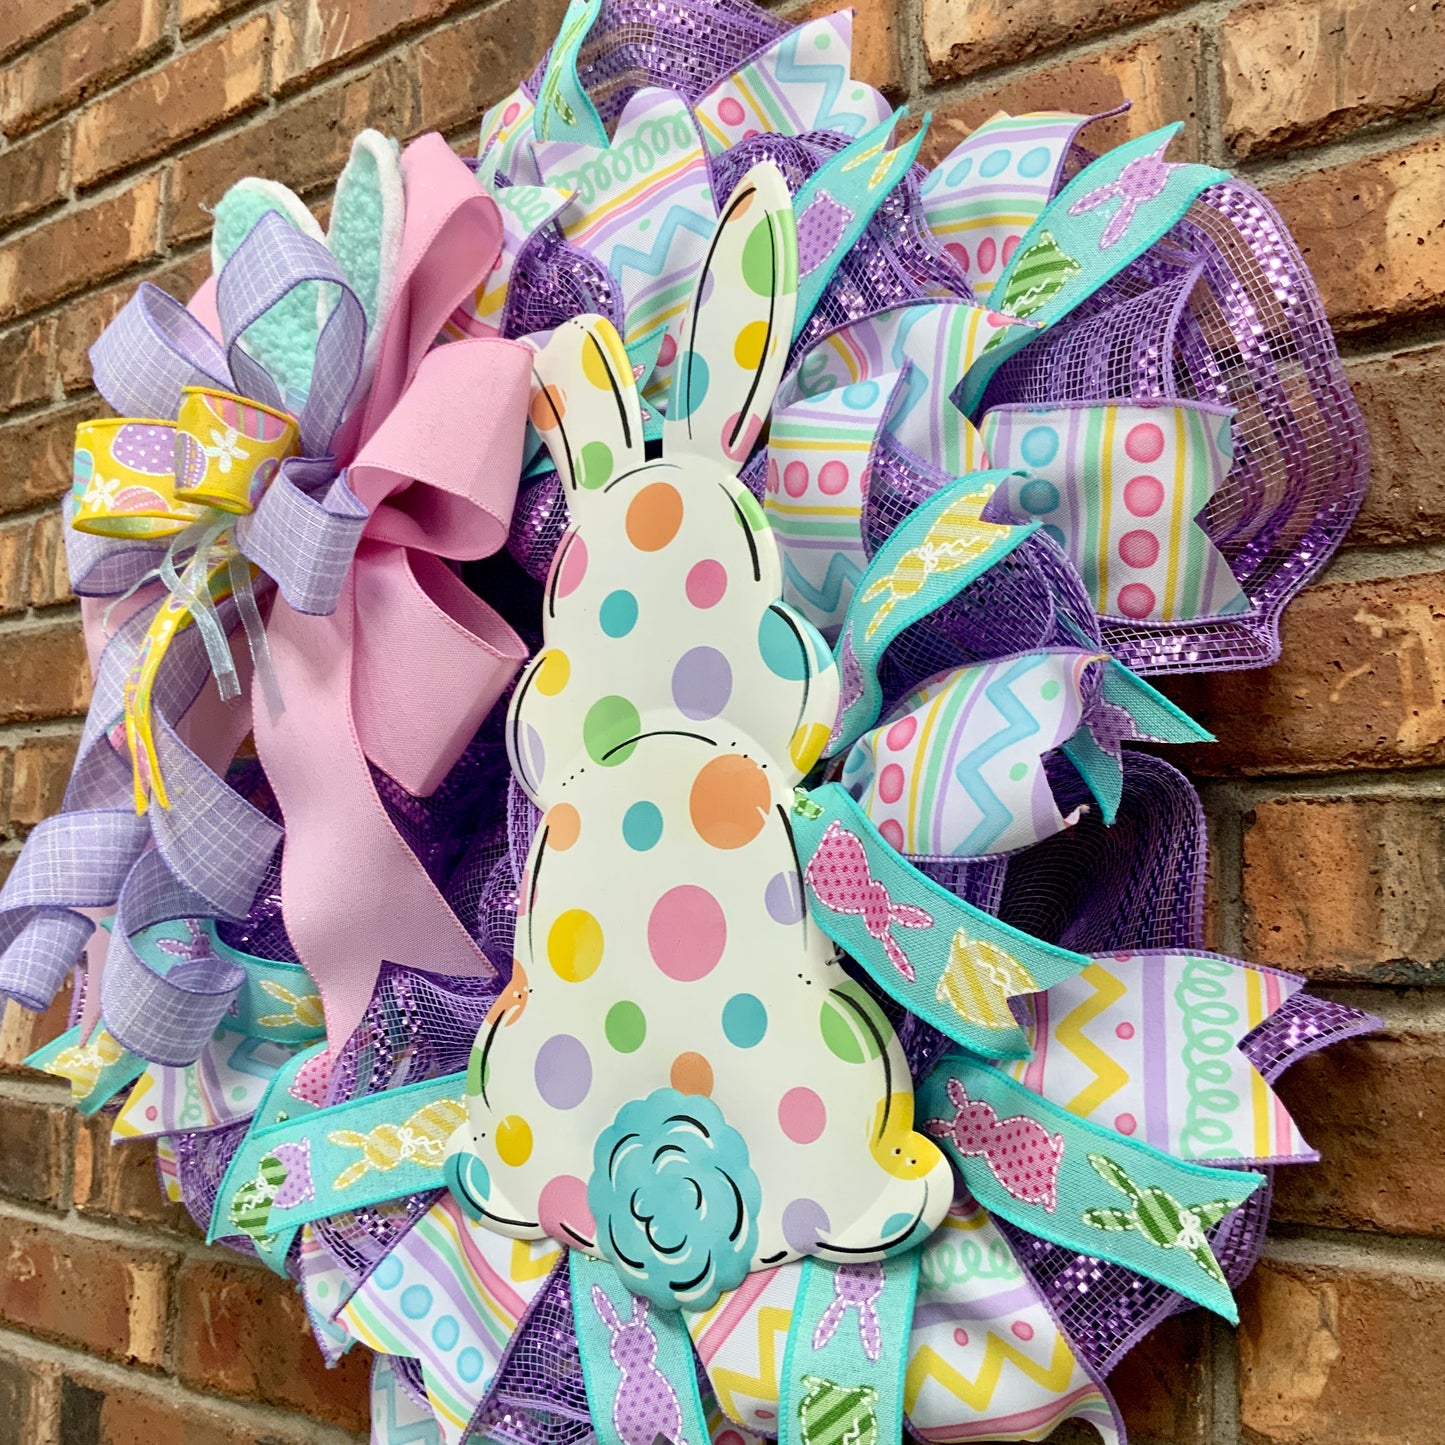 Easter Pancake Wreath, Easter Wreath For Front Door, Easter Rabbit Wreath, Easter Bunny Wreath, Easter Pastel Wreath, Spring Easter Wreath